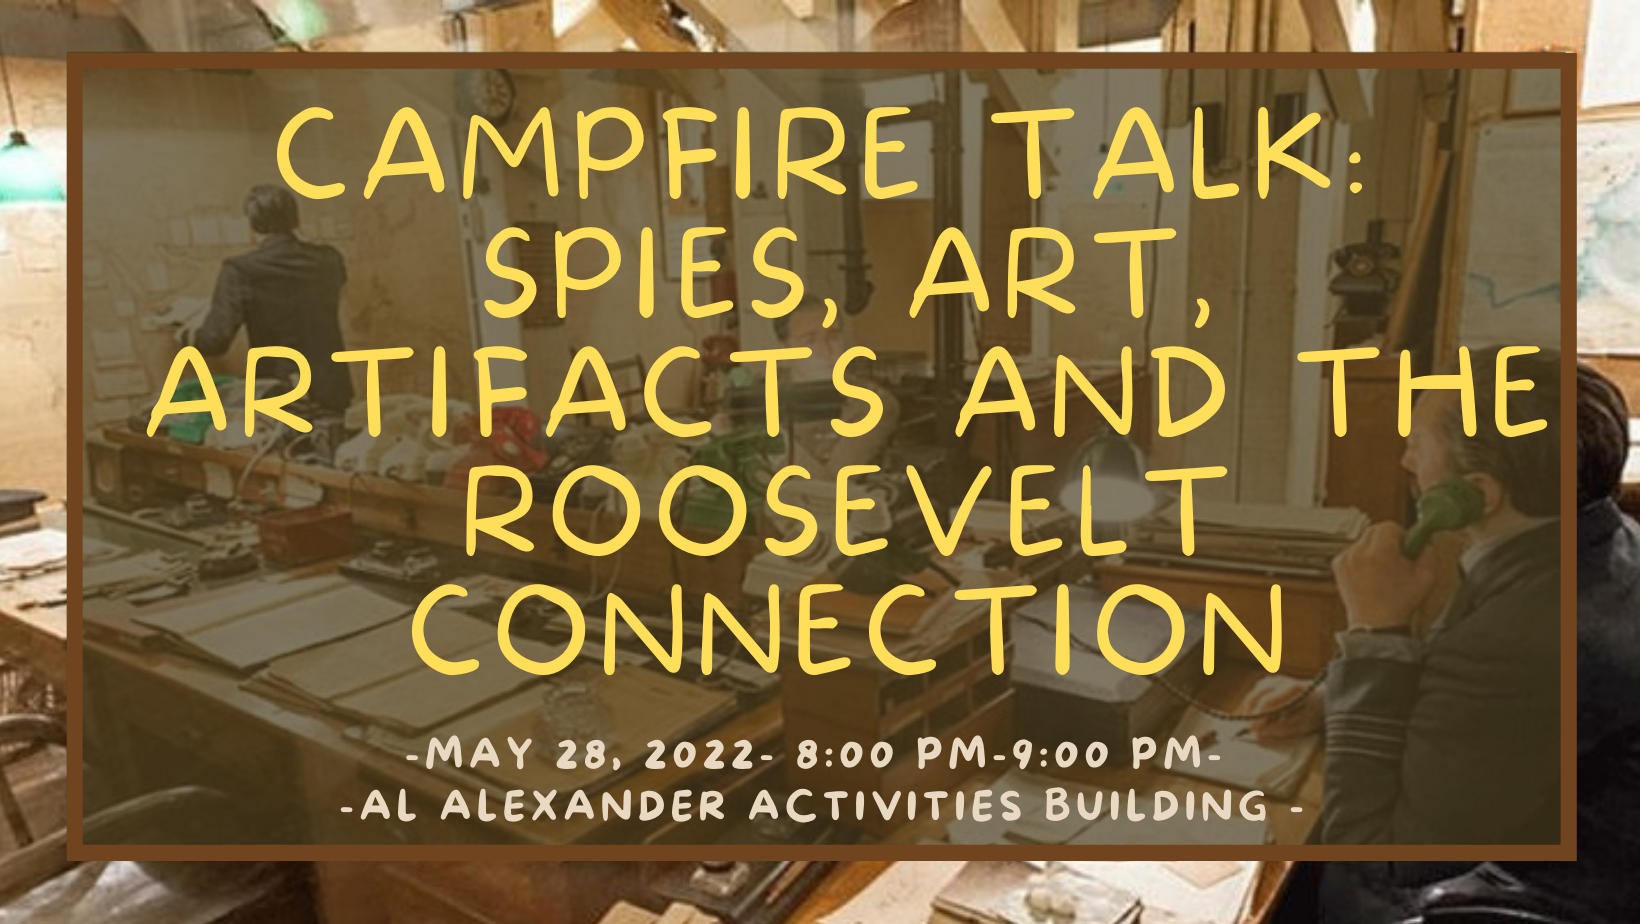 Campfire Talk: Spies, Art, Artifacts and the Roosevelt Connection